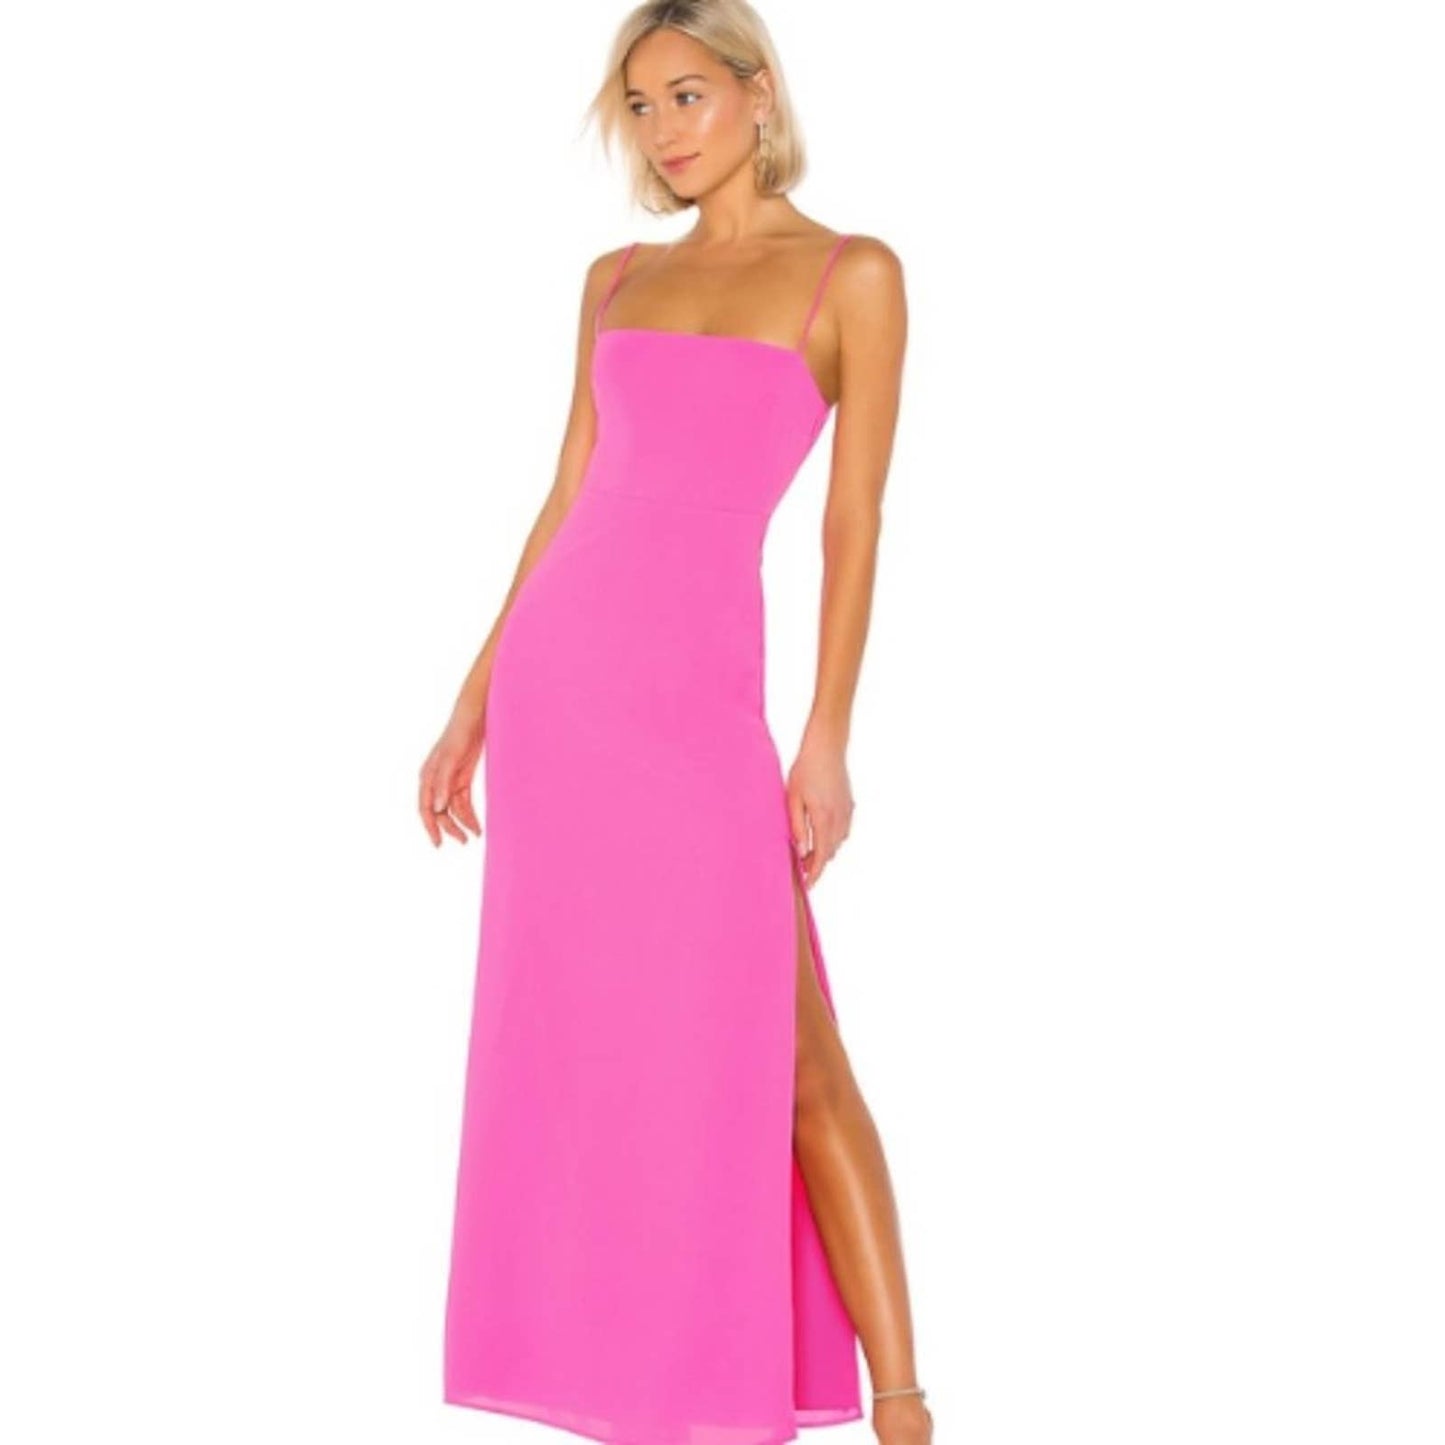 superdown Addison Maxi Dress in Pink NWT Size Small